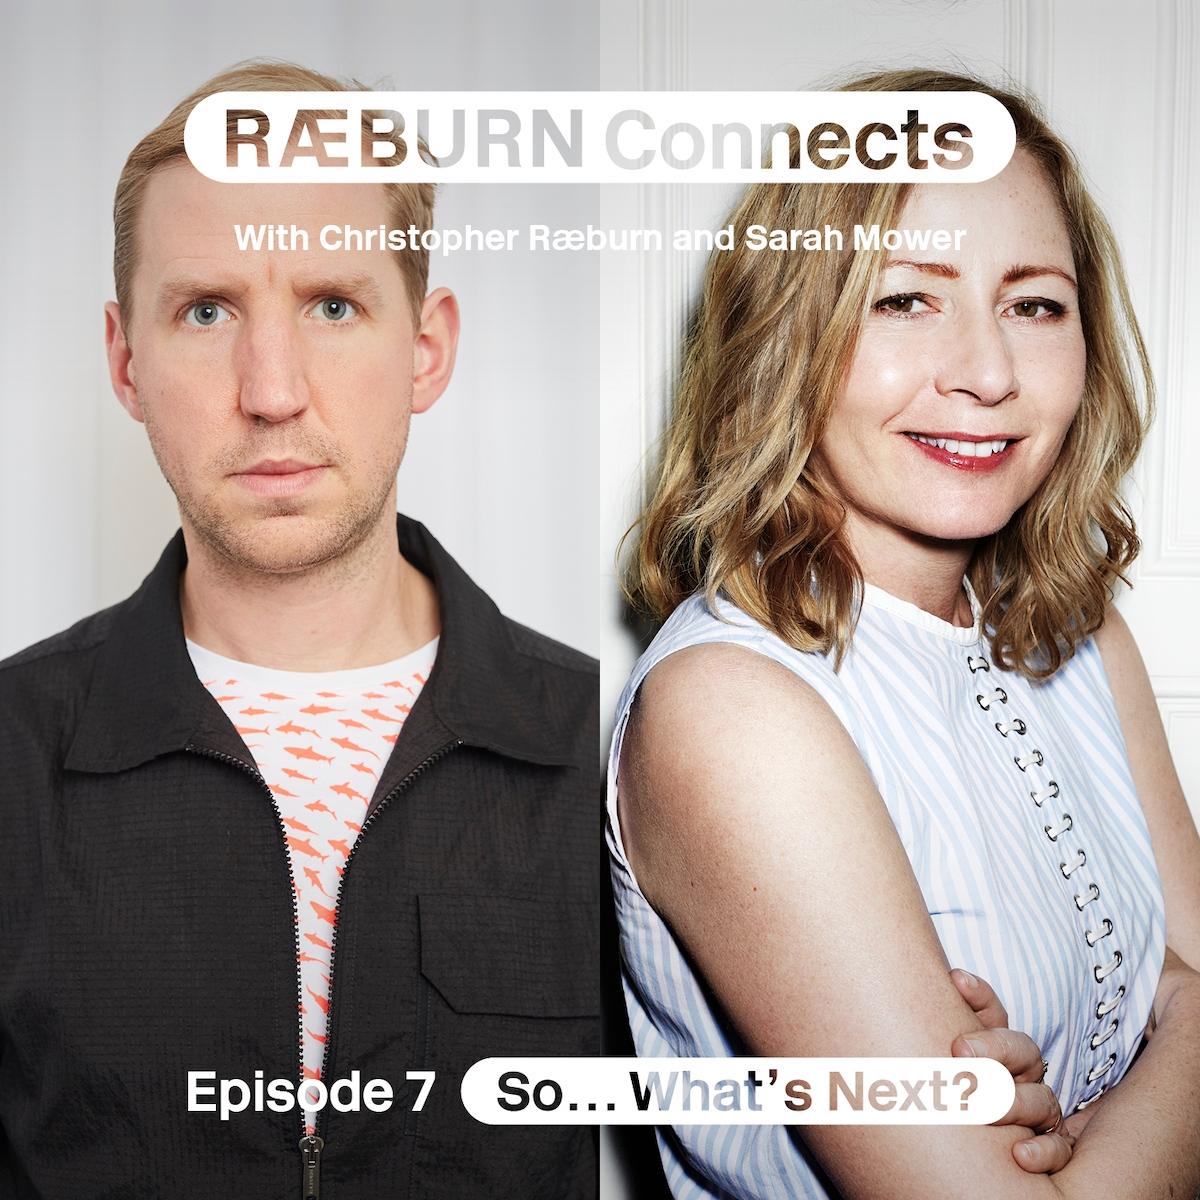 RÆBURN Connects: So... What's Next?